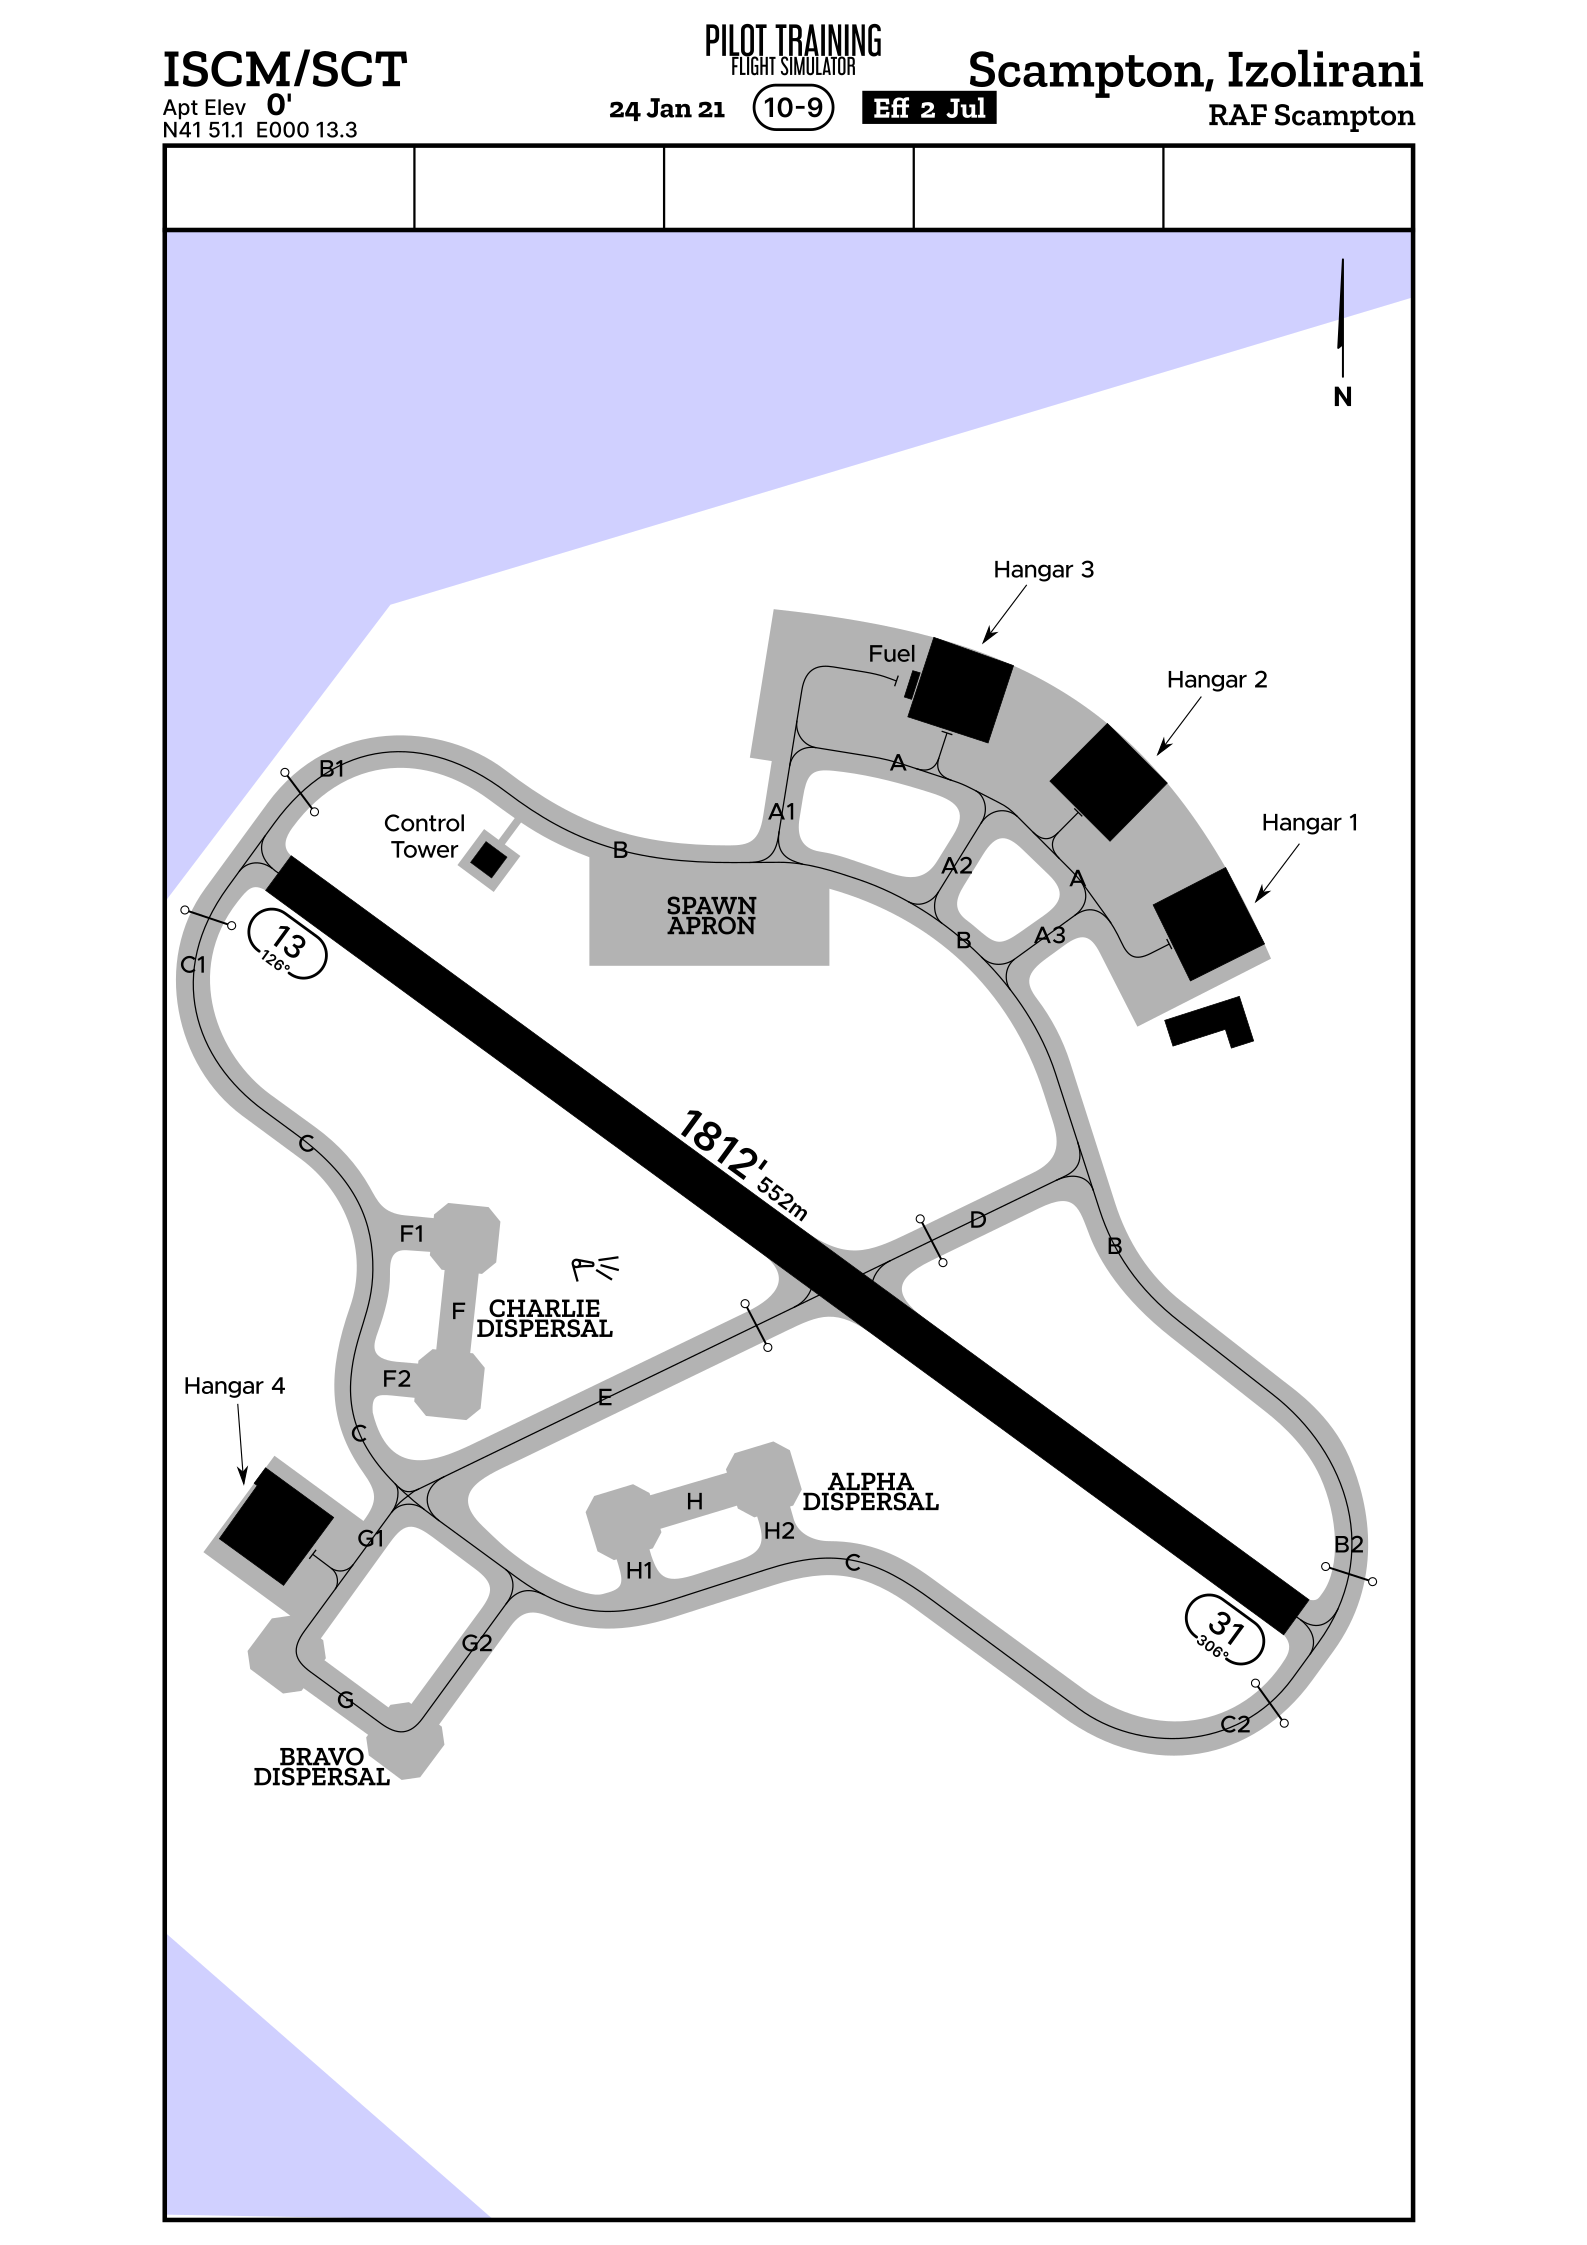 Airport ground chart for the airport ISCM